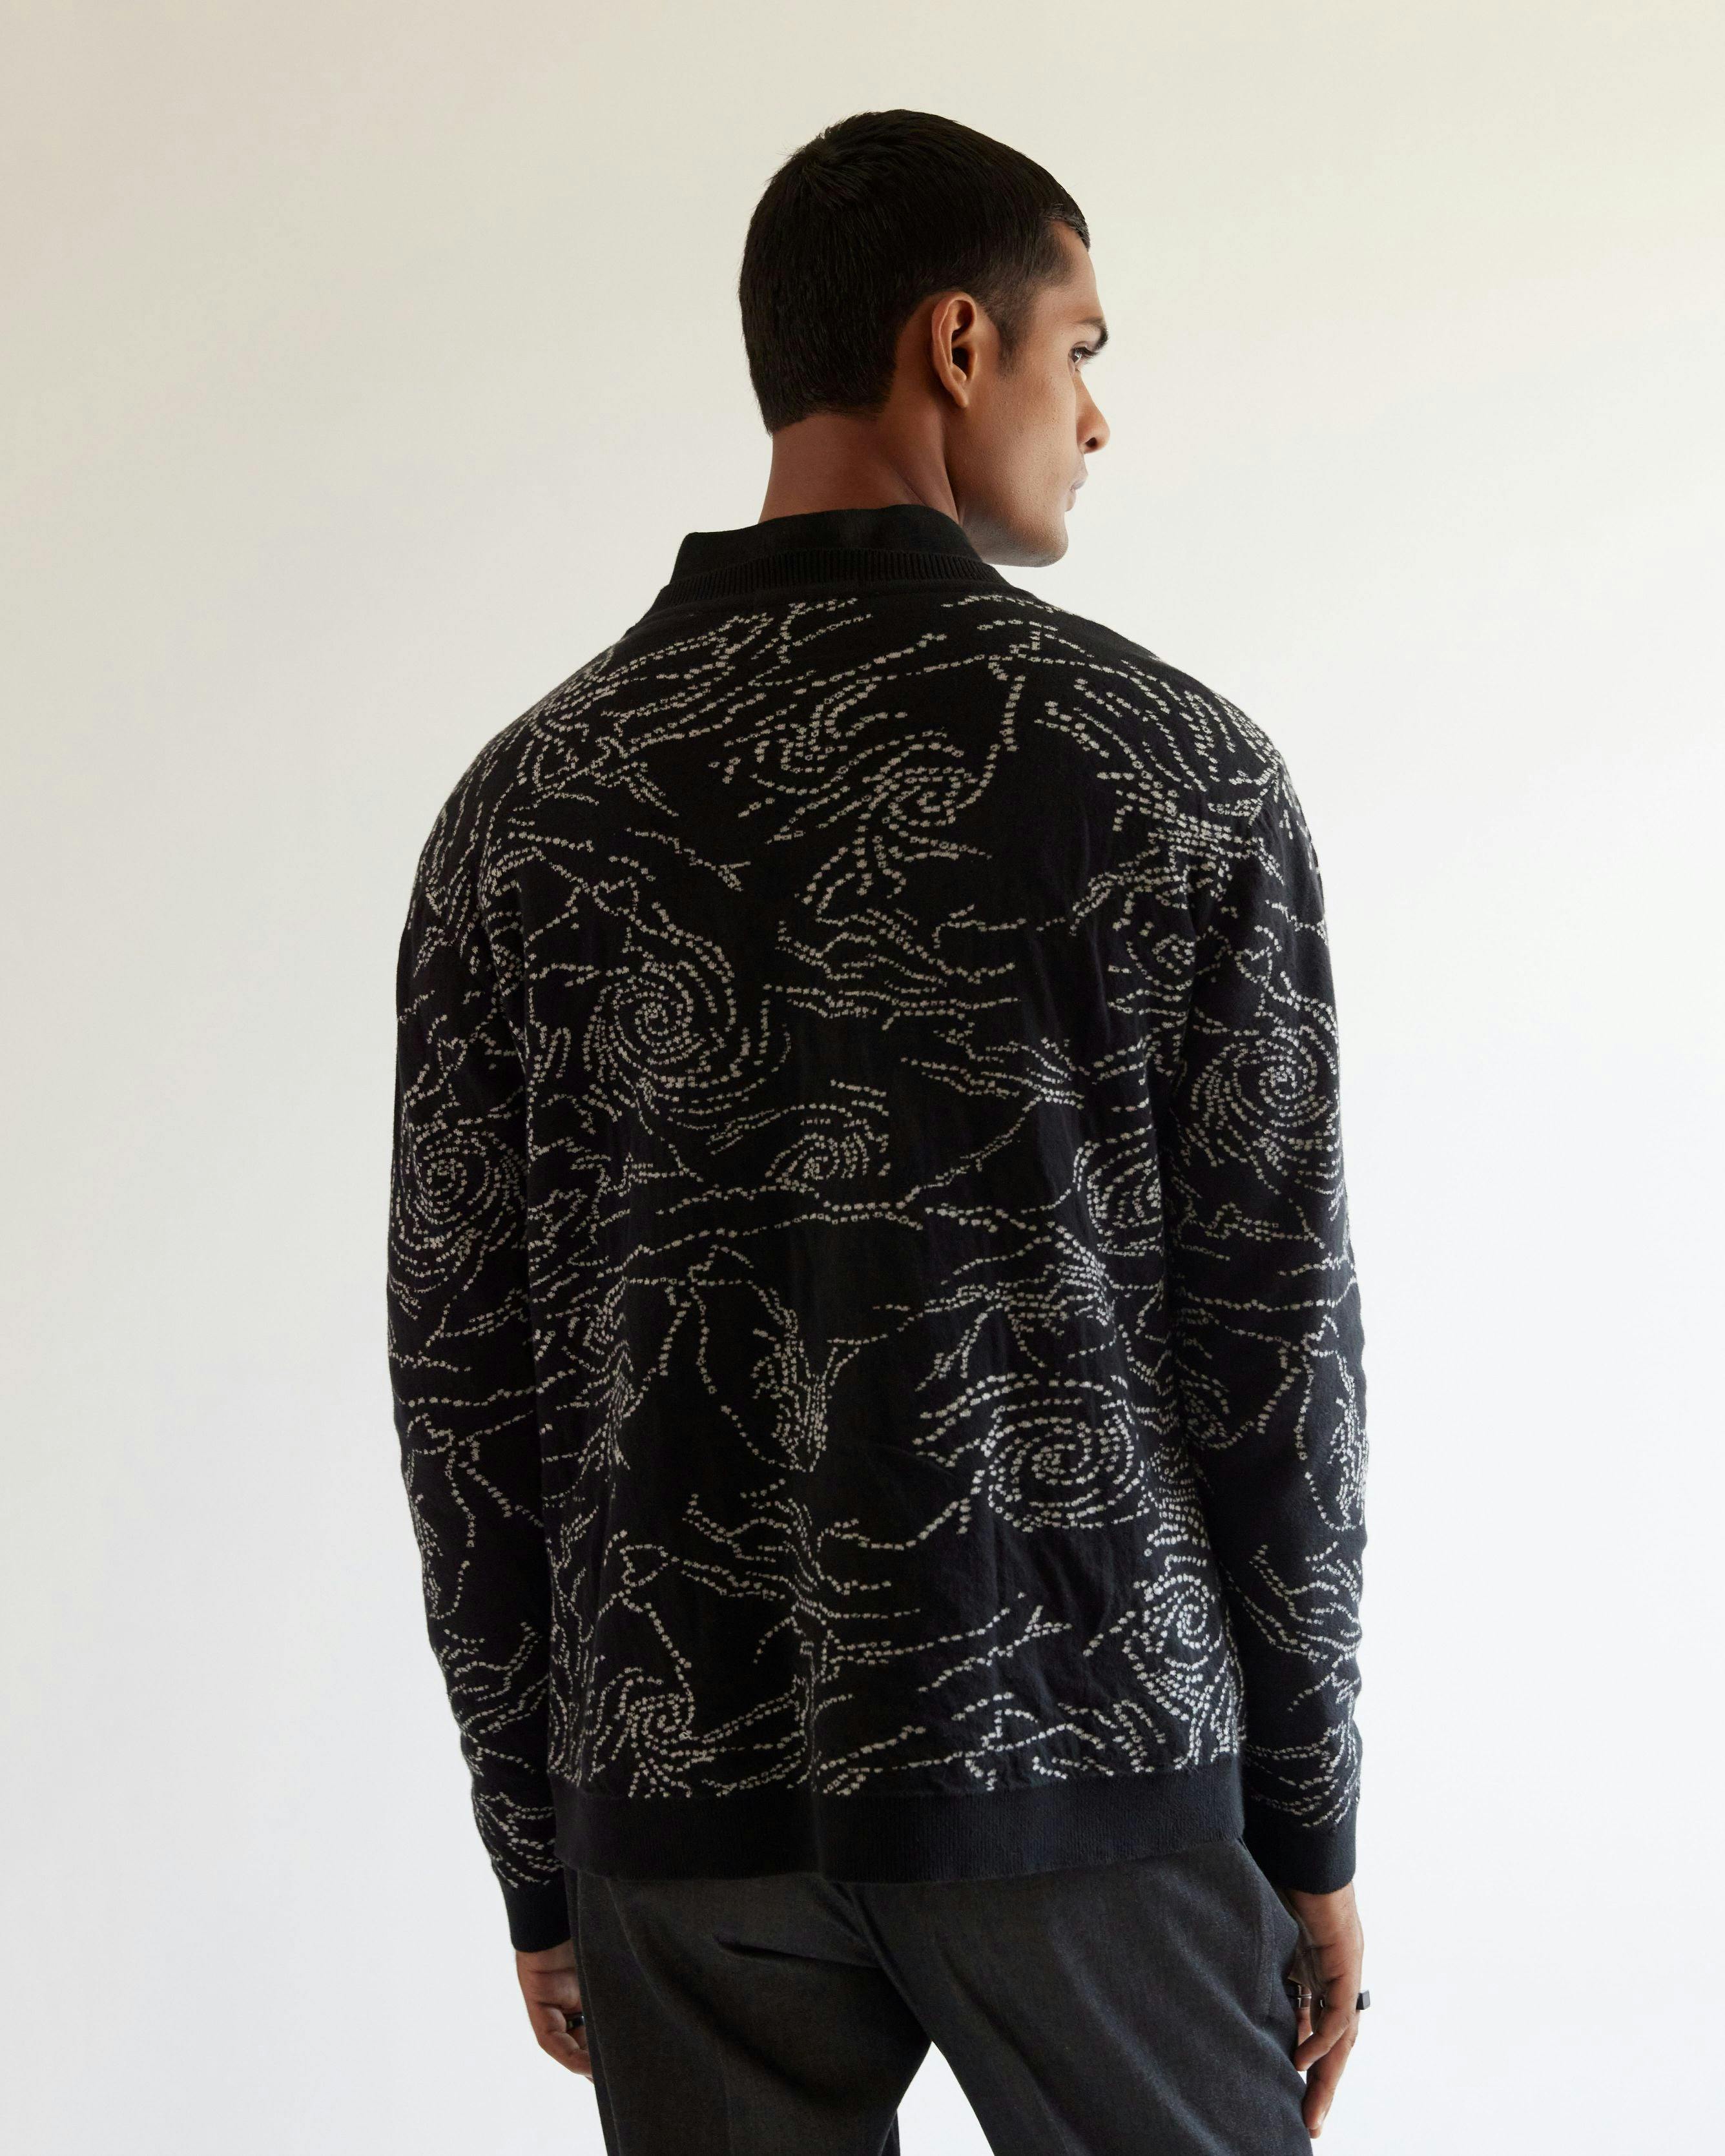 Thumbnail preview #1 for Black Hole Jacquard Sweater